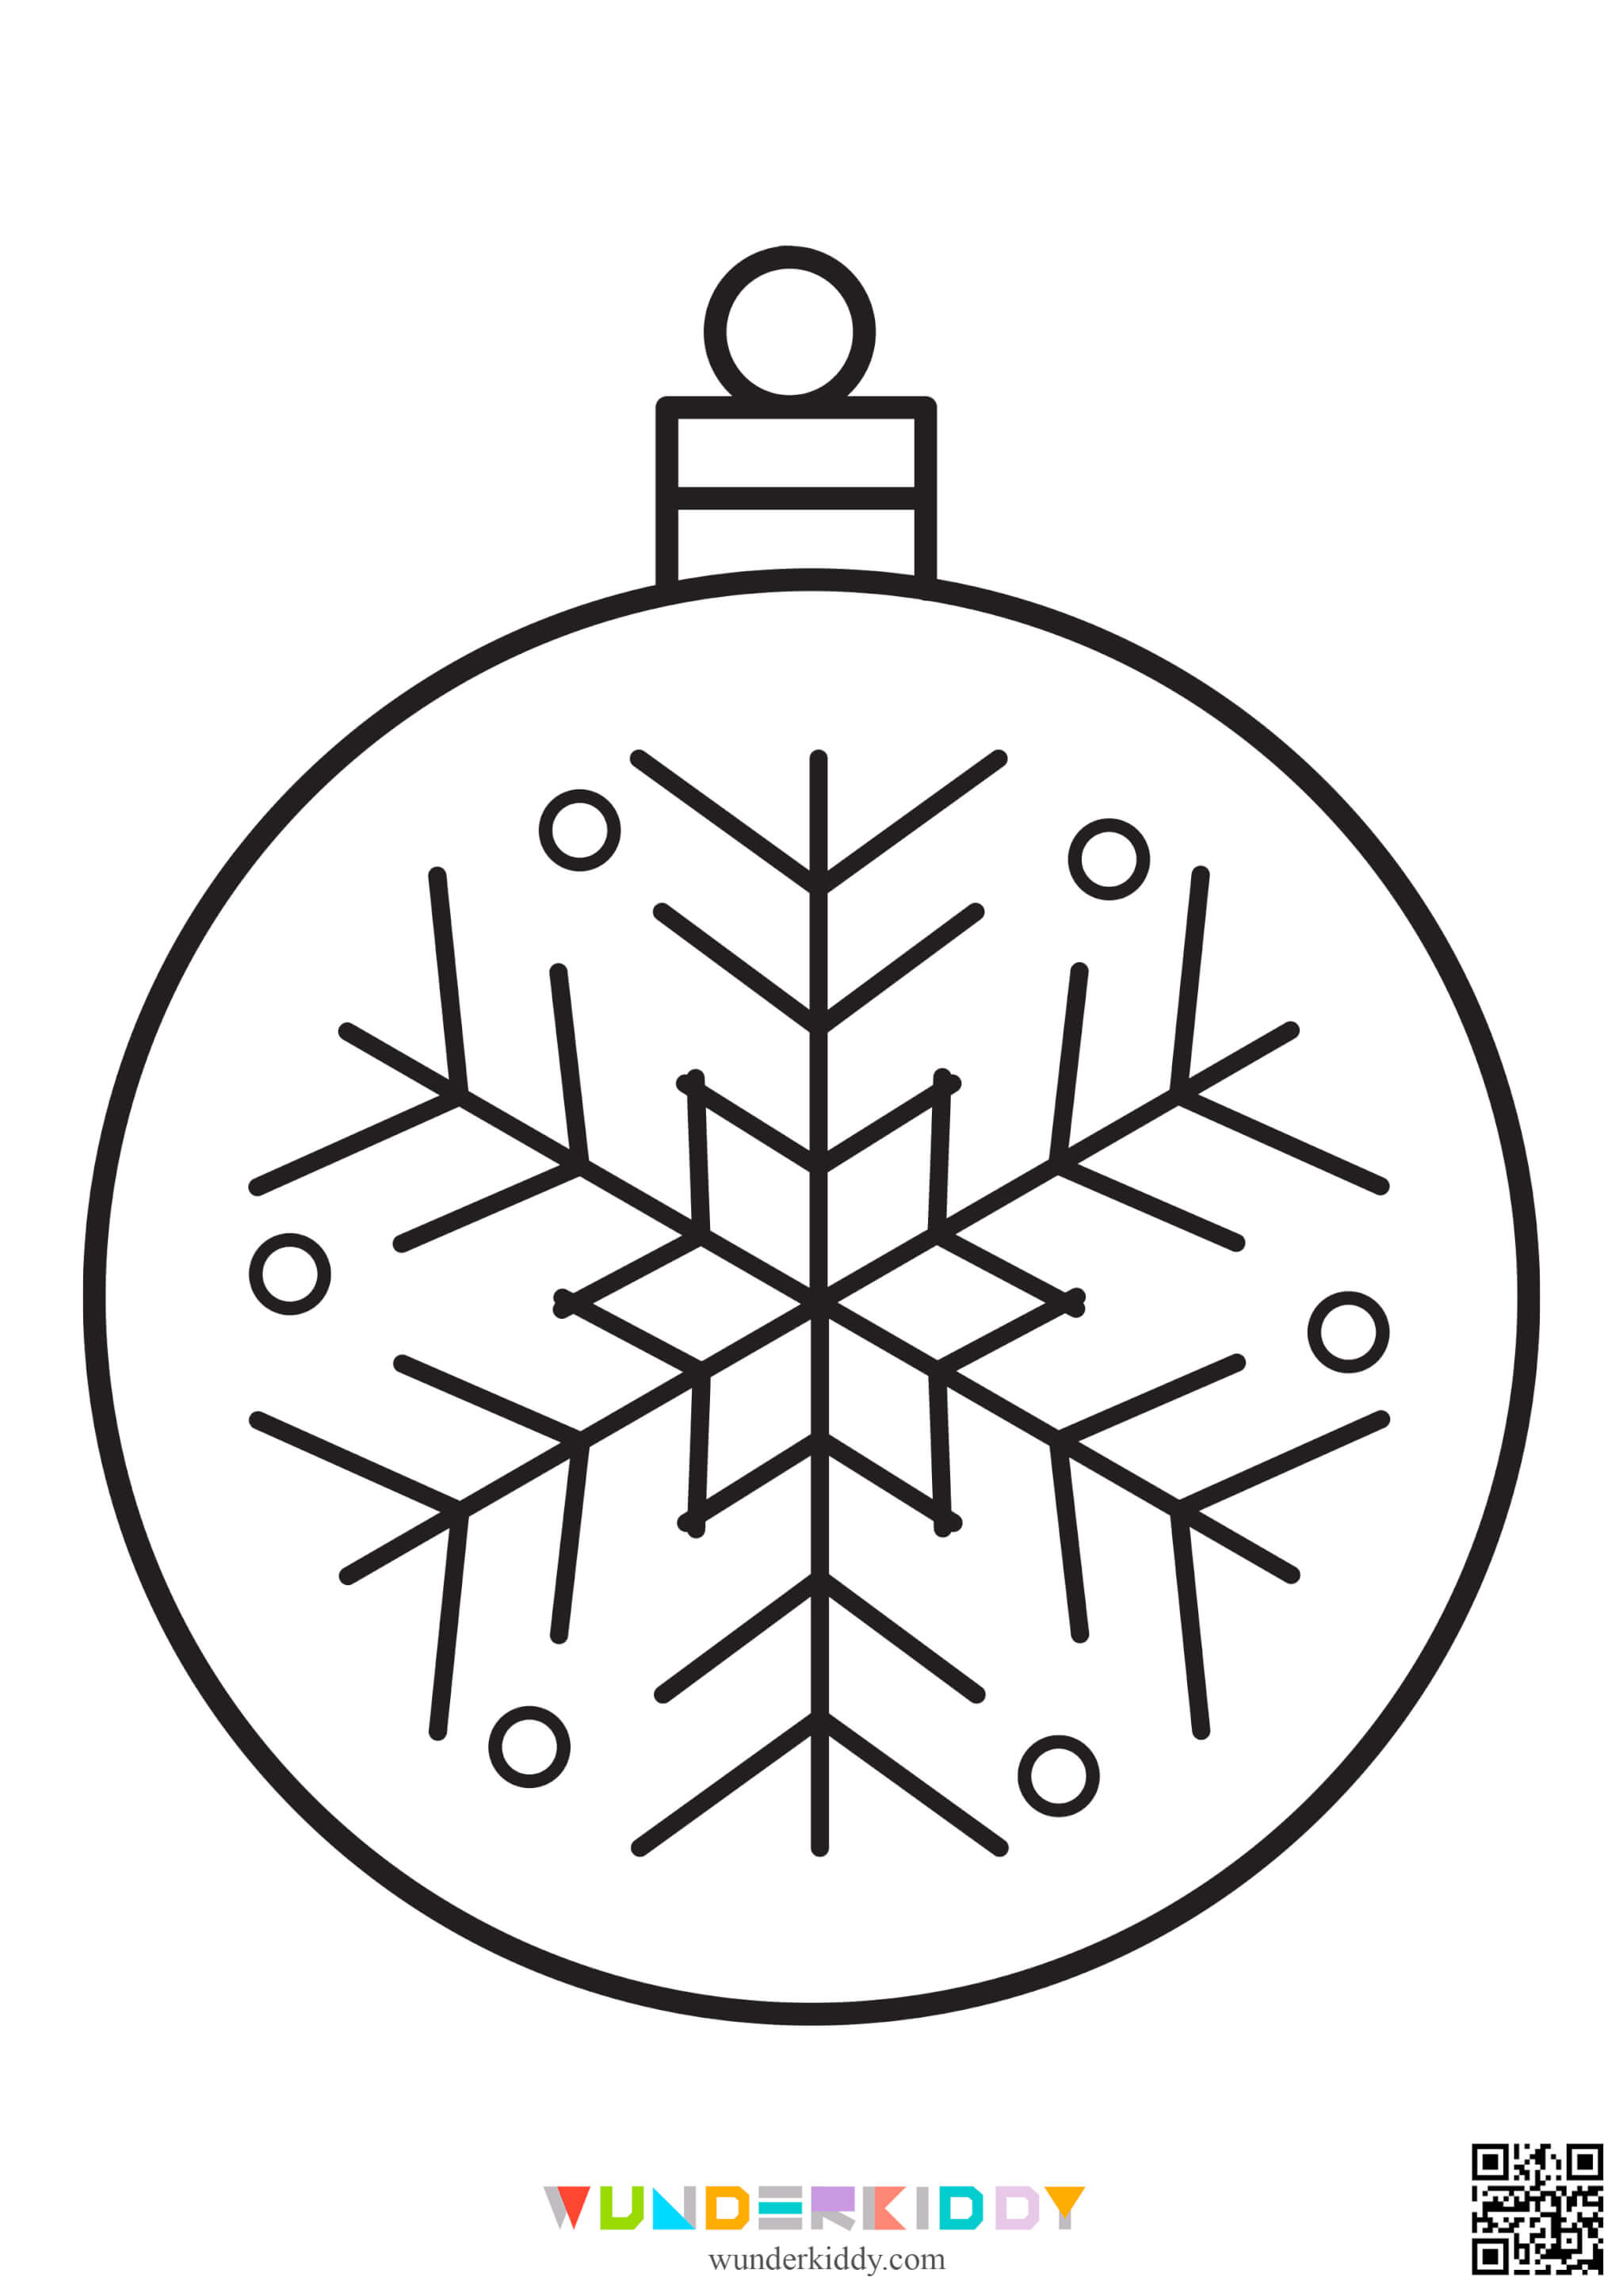 Christmas Ornament Coloring Pages - Image 8